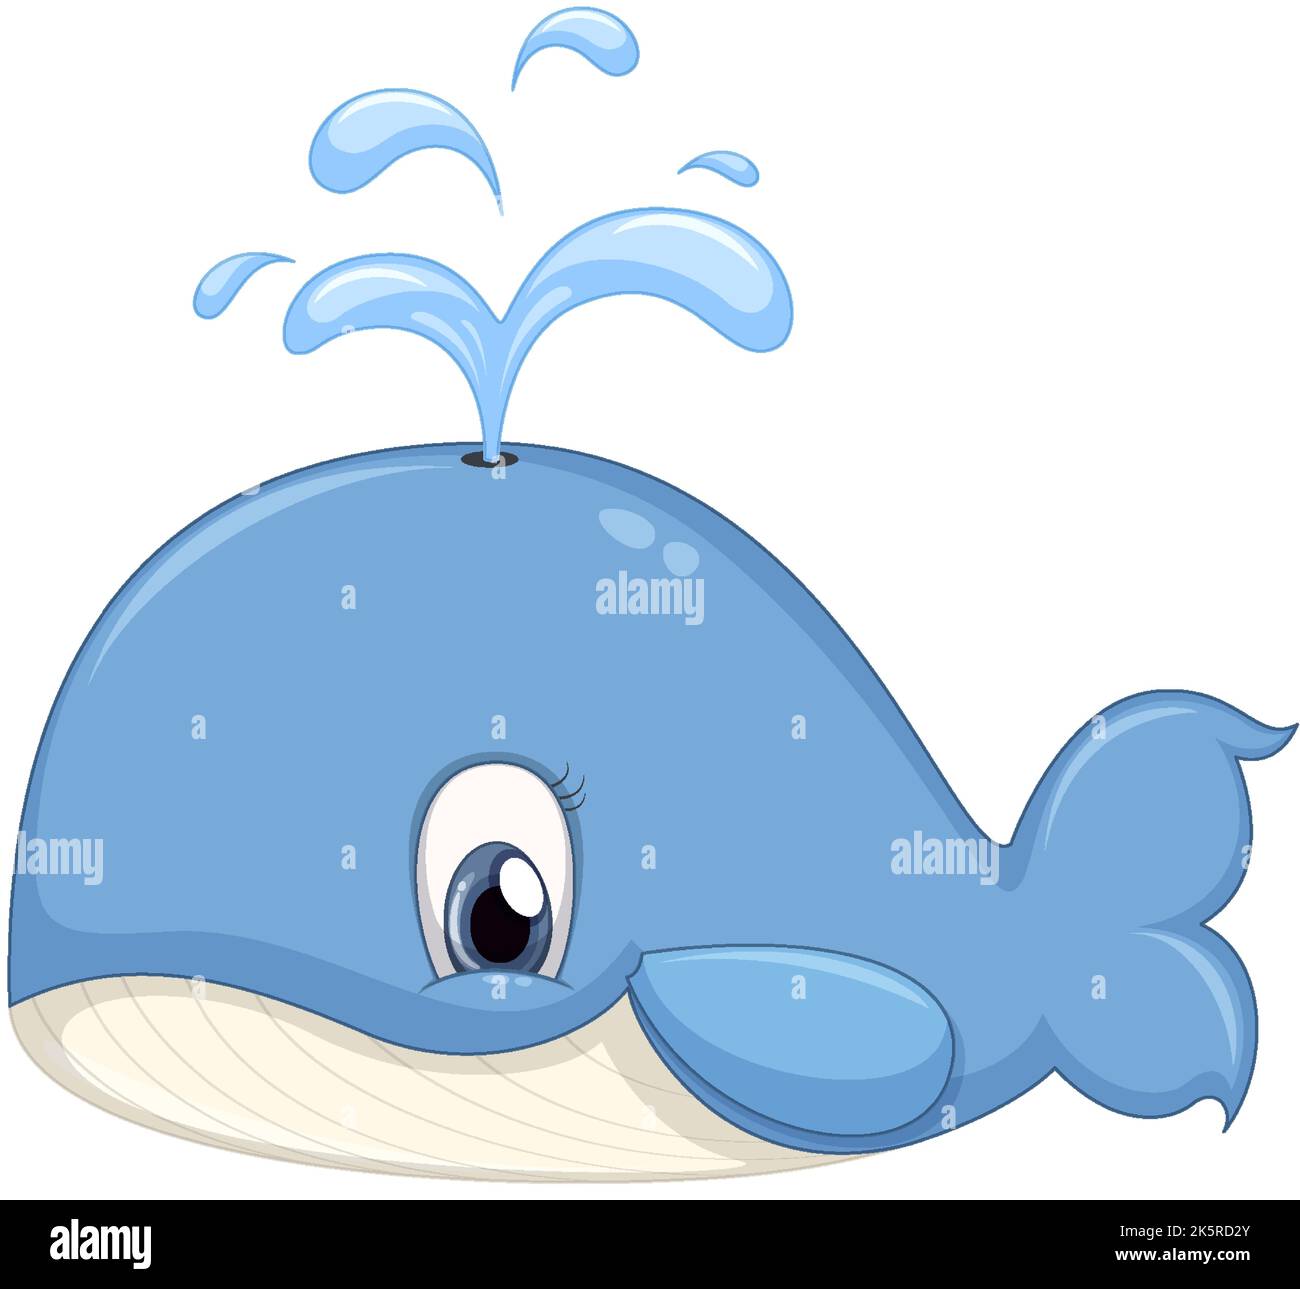 Cute whale cartoon character illustration Stock Vector